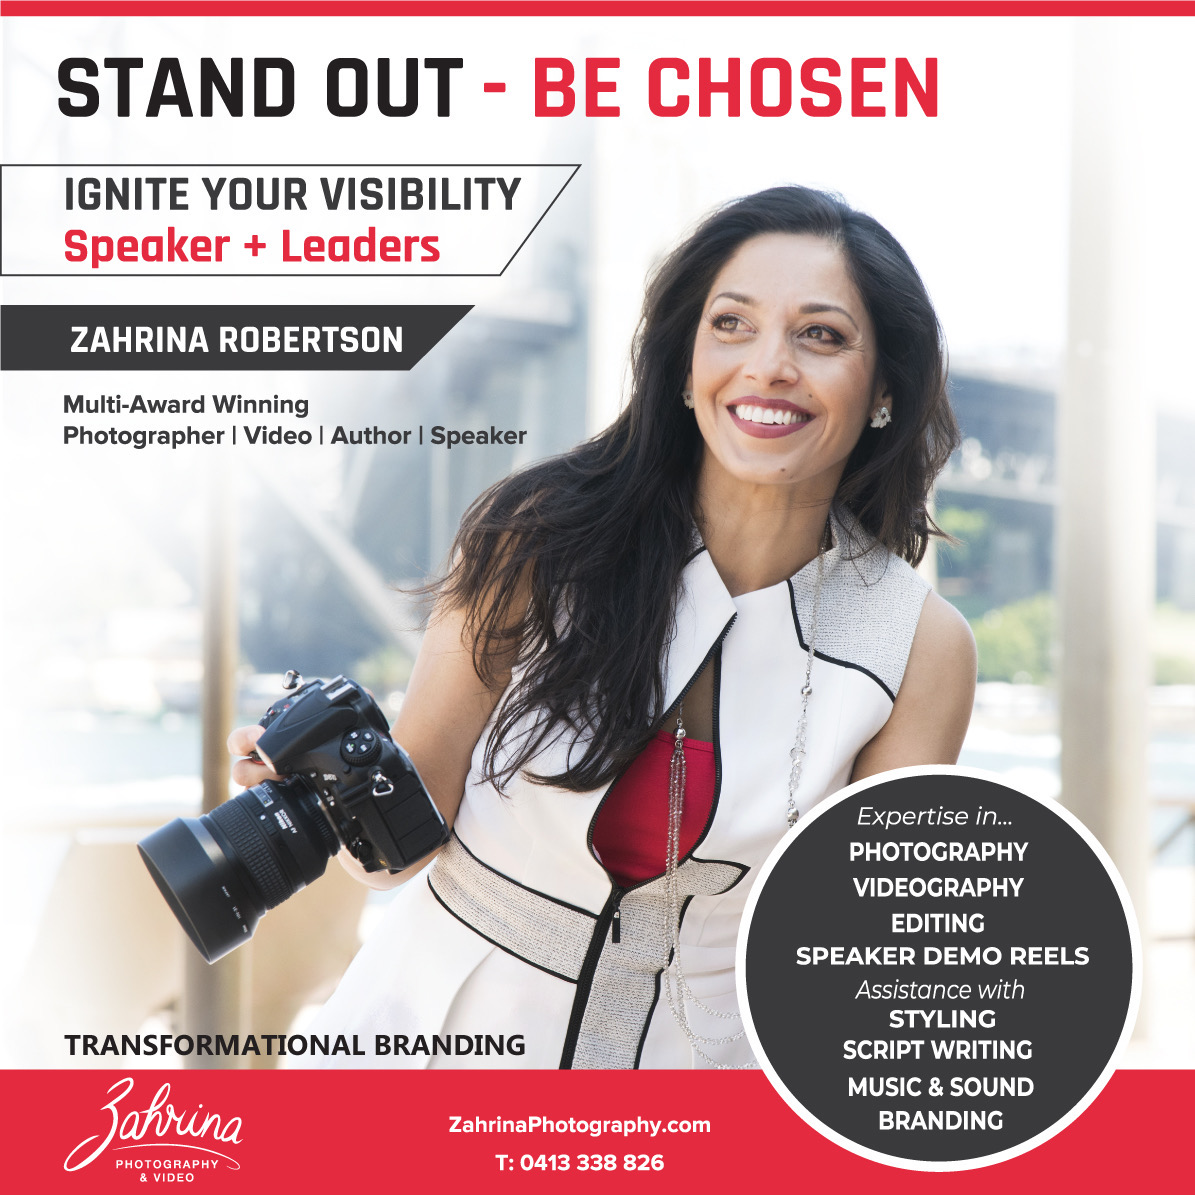 Zahrina Robertson - Leading Expert STAND OUT - BE CHOSEN Brand PHOTOGRAPHER + VIDEOGRAPHER for Speakers + Leaders